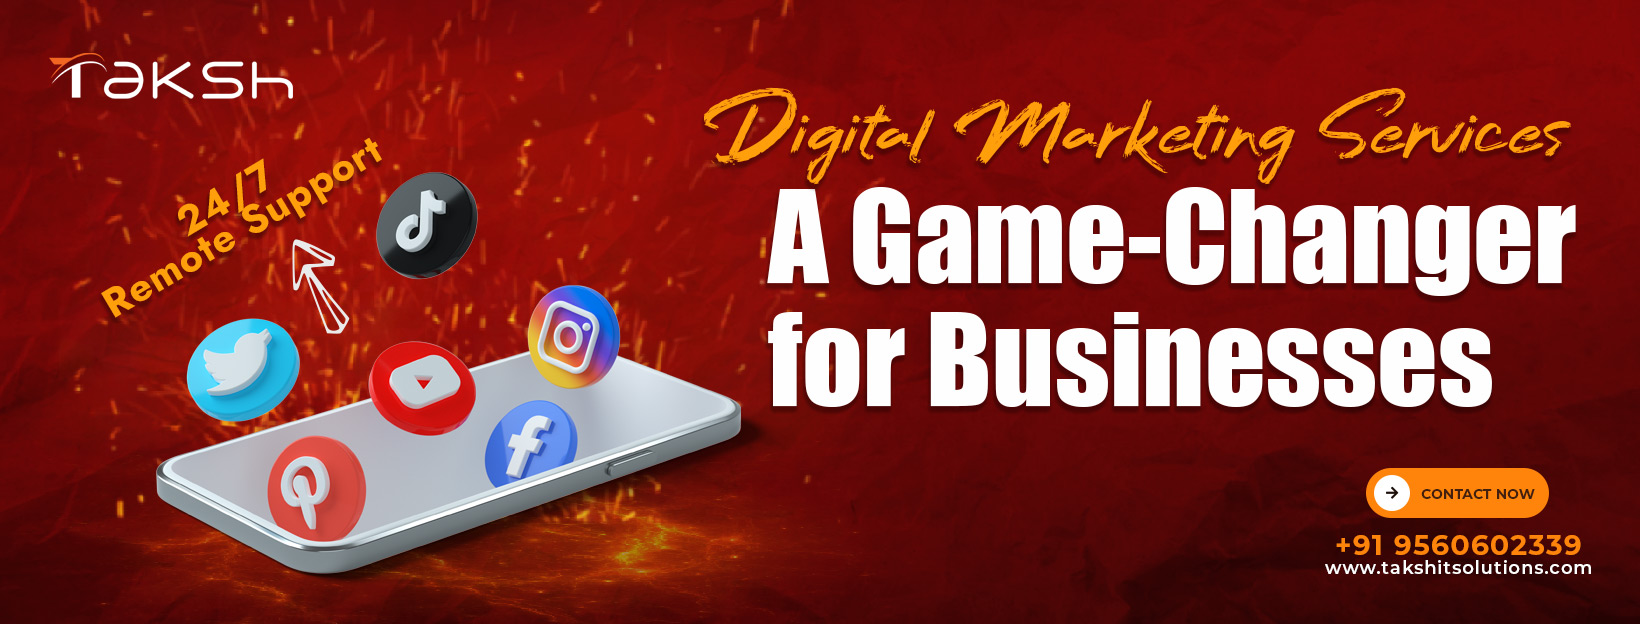 Digital Marketing Services: A Game-Changer for Businesses